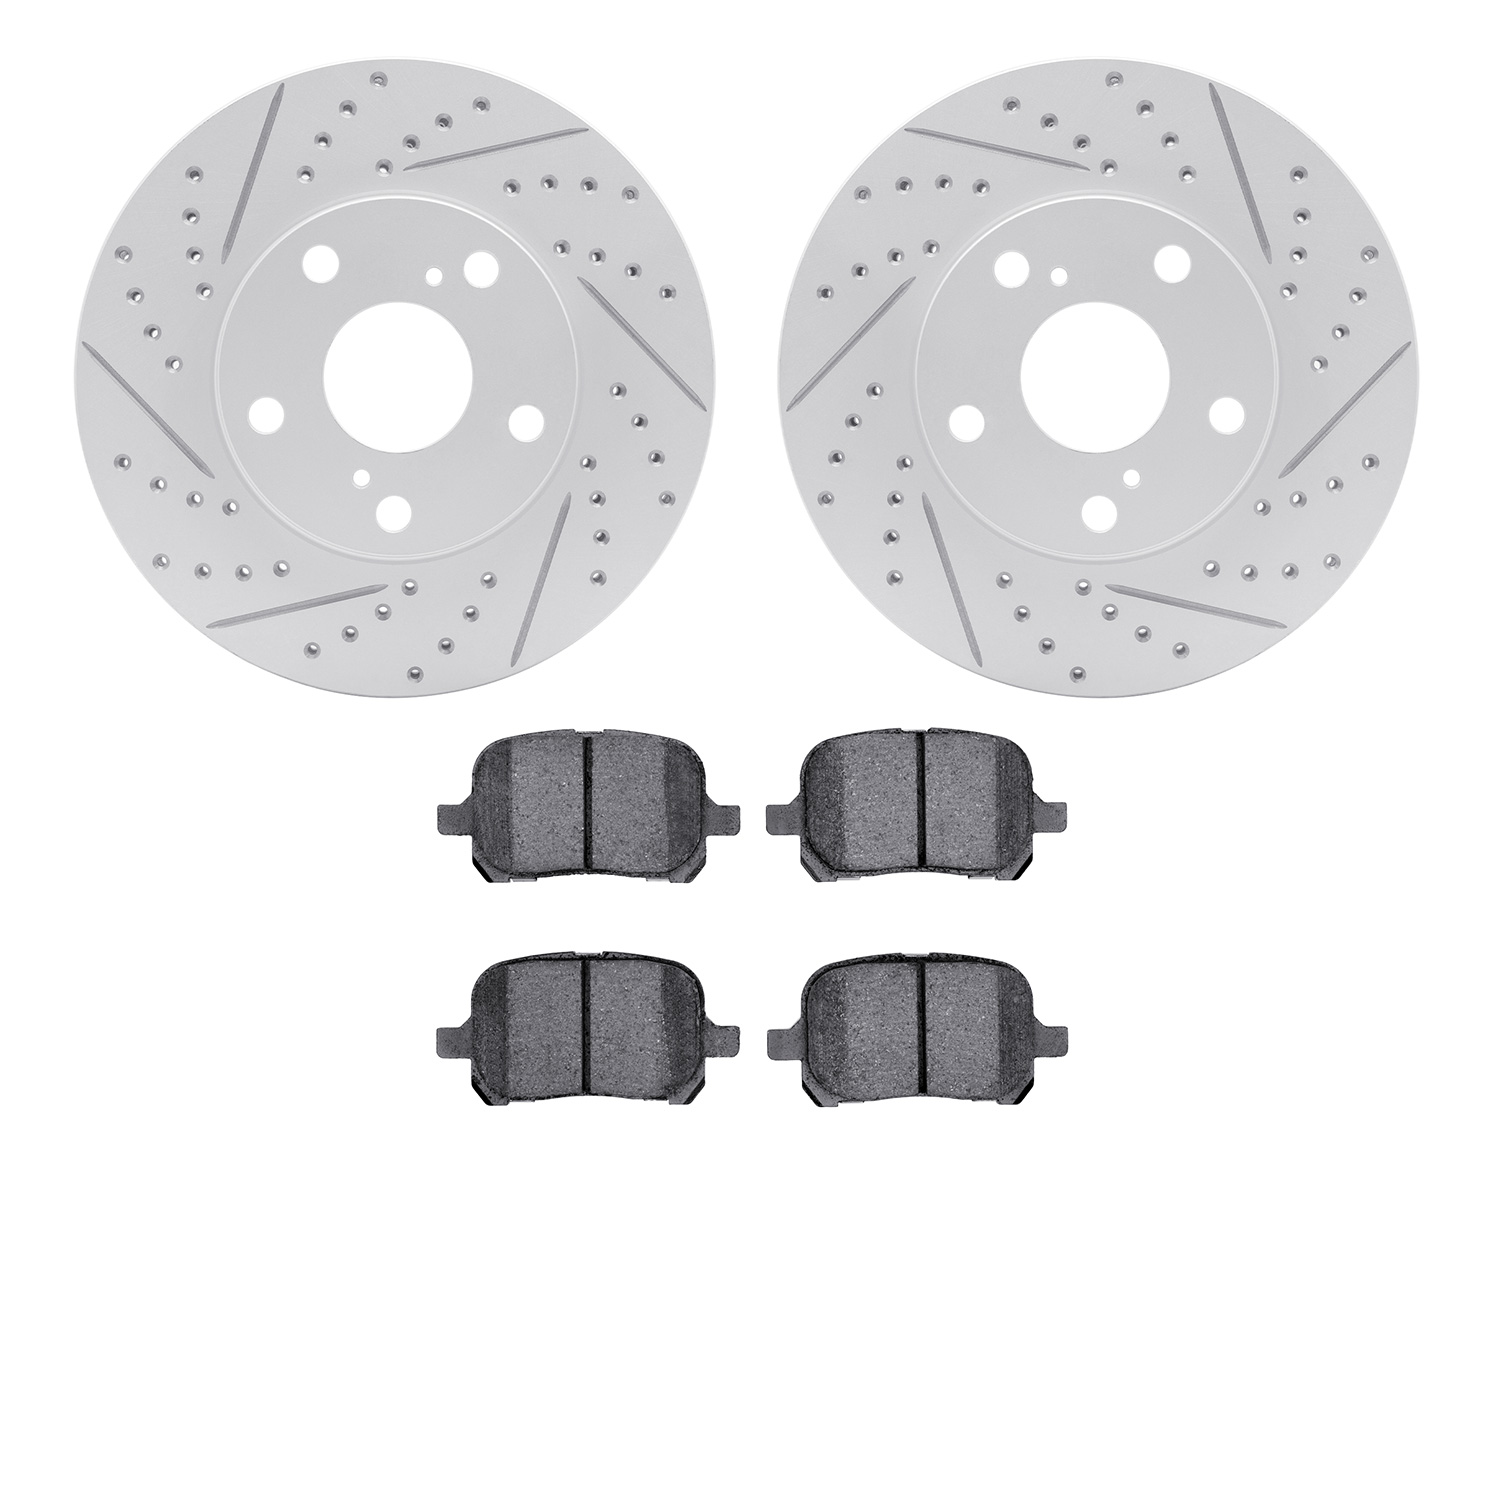 2502-76002 Geoperformance Drilled/Slotted Rotors w/5000 Advanced Brake Pads Kit, 1997-2004 Lexus/Toyota/Scion, Position: Front